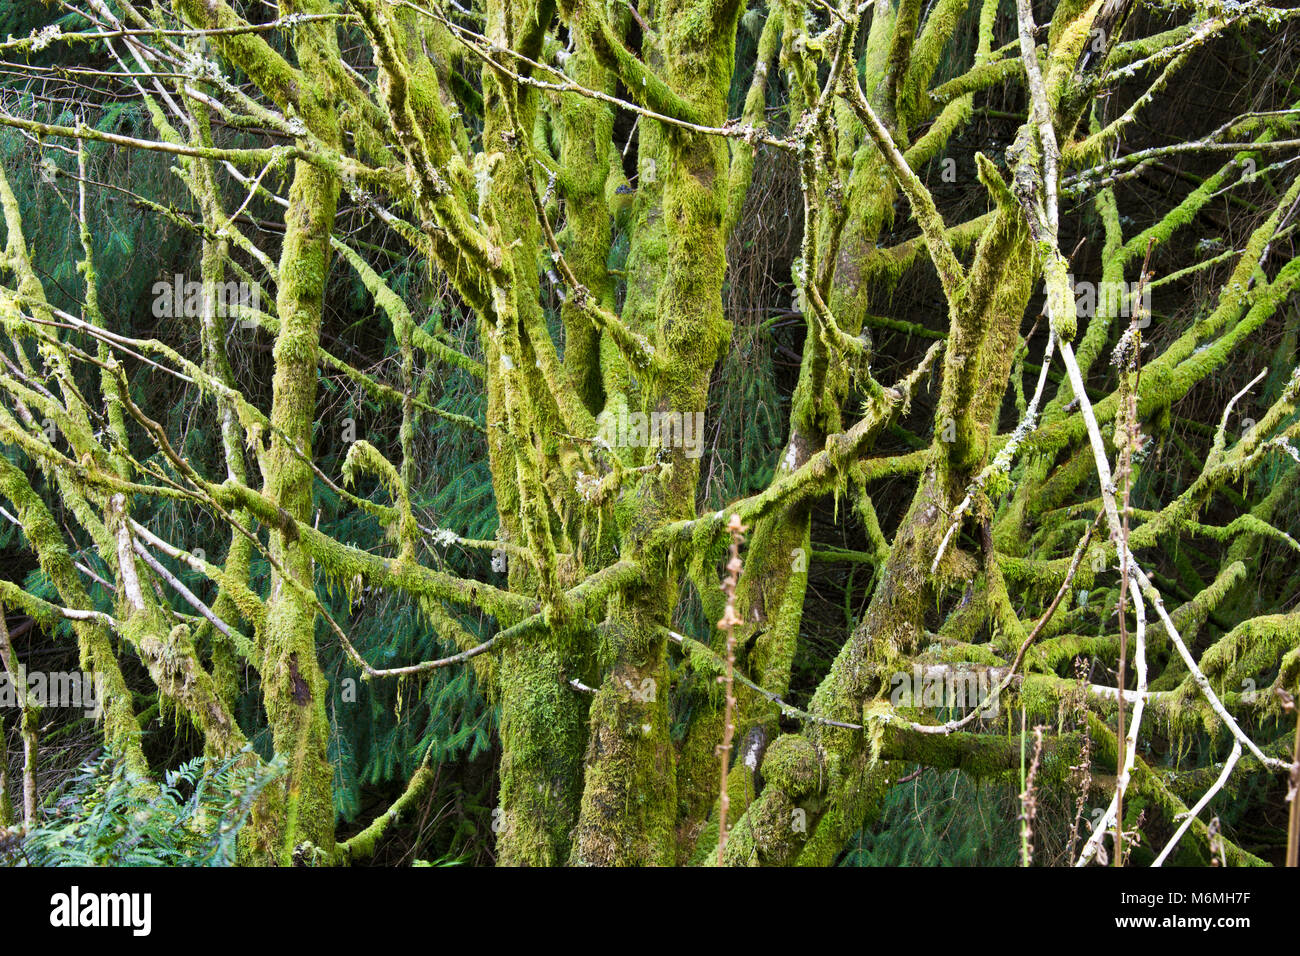 Moss covered tree branches Stock Photo